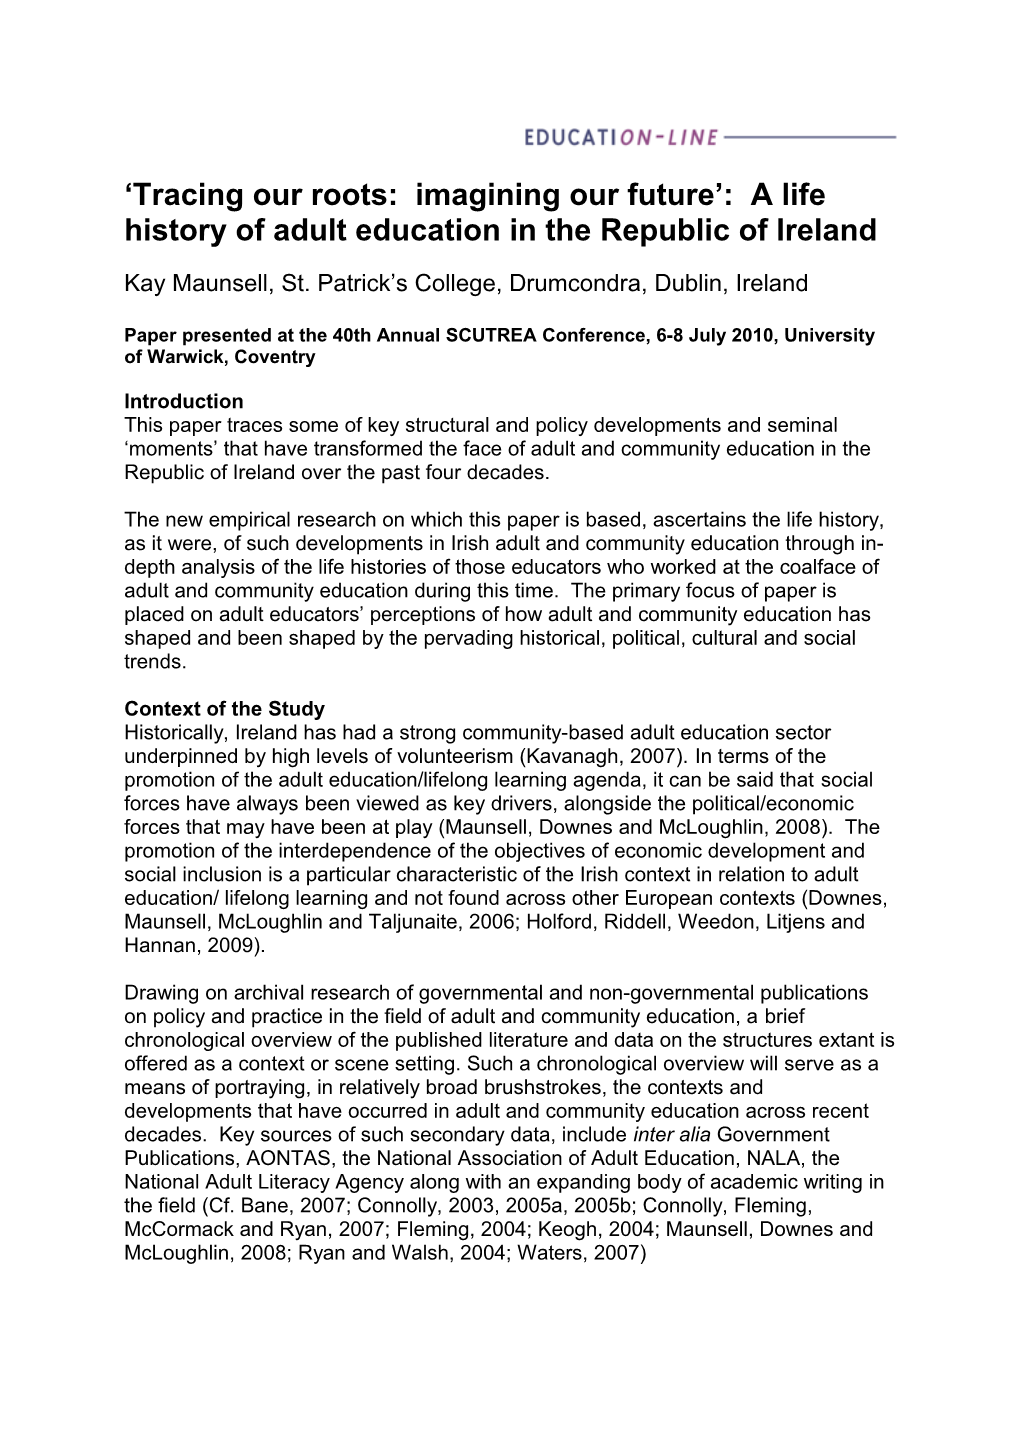 Tracing Our Roots: Imagining Our Future : a Life History of Adult Education in the Republic